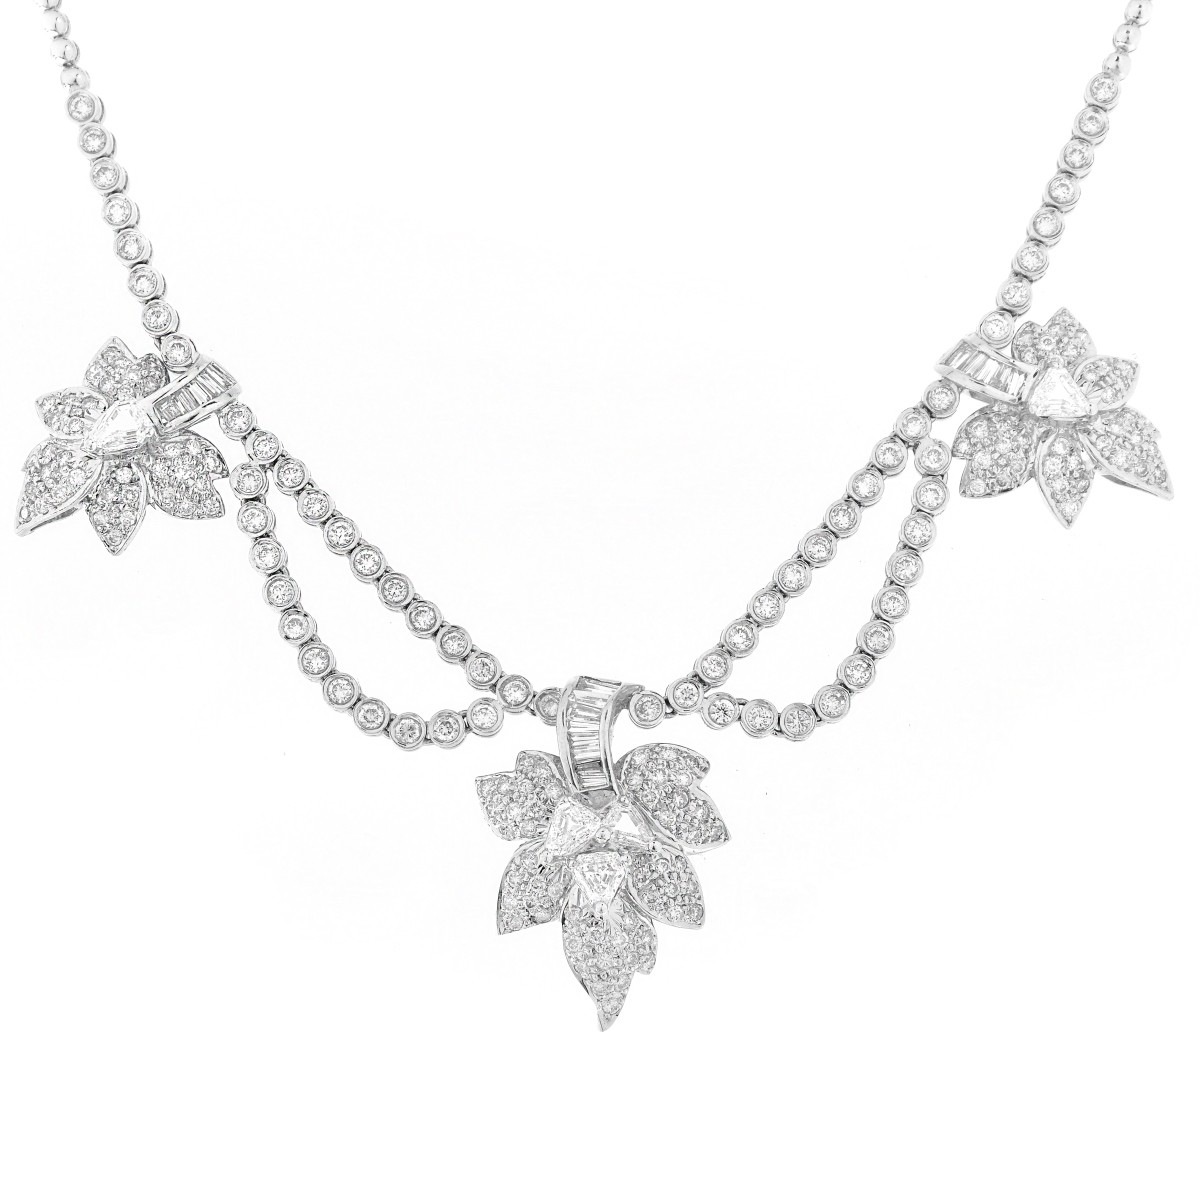 6.09ct Diamond and 18K Gold Necklace